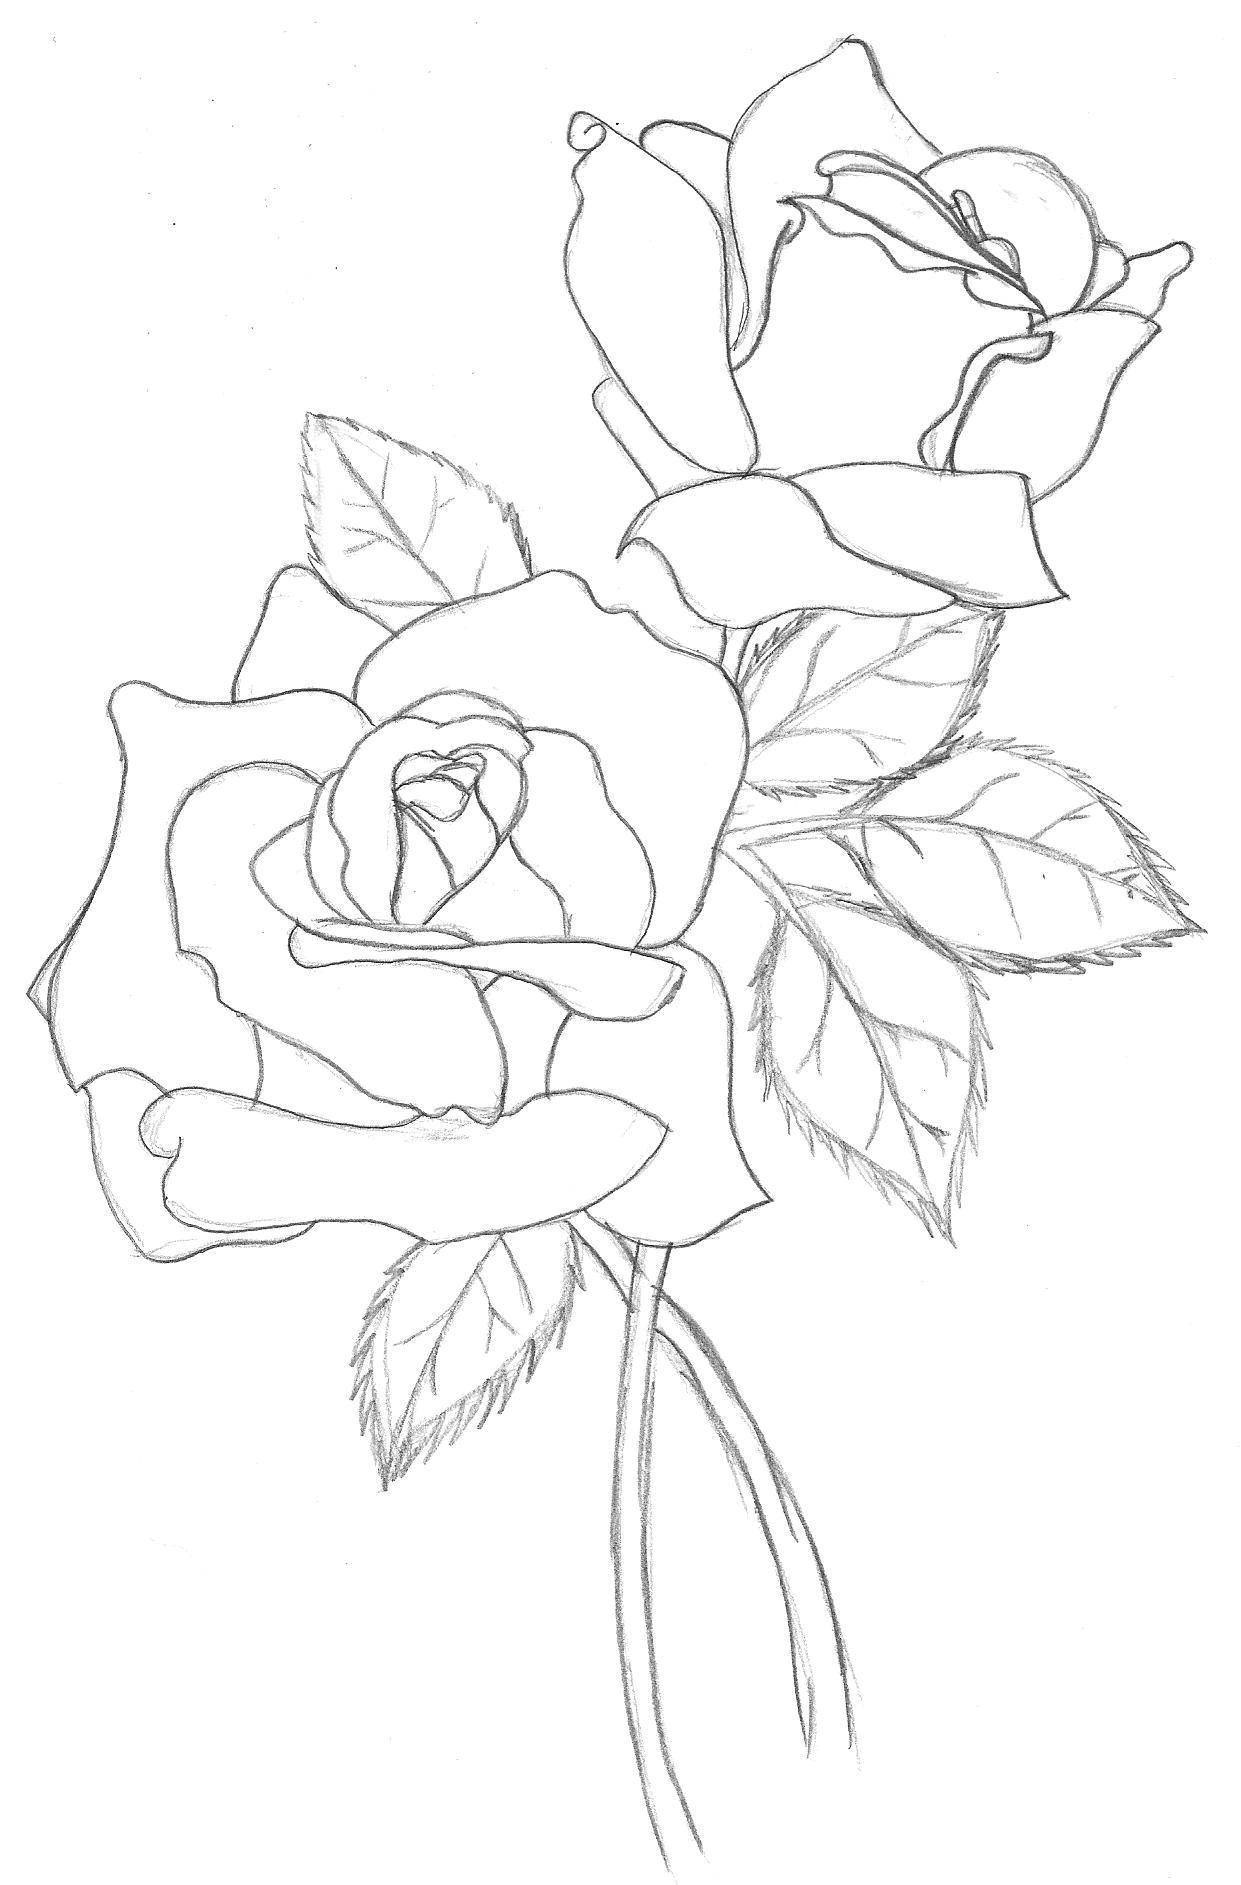 Coloring The contours of the roses. Category The contours of a rose. Tags:  rose, flowers.